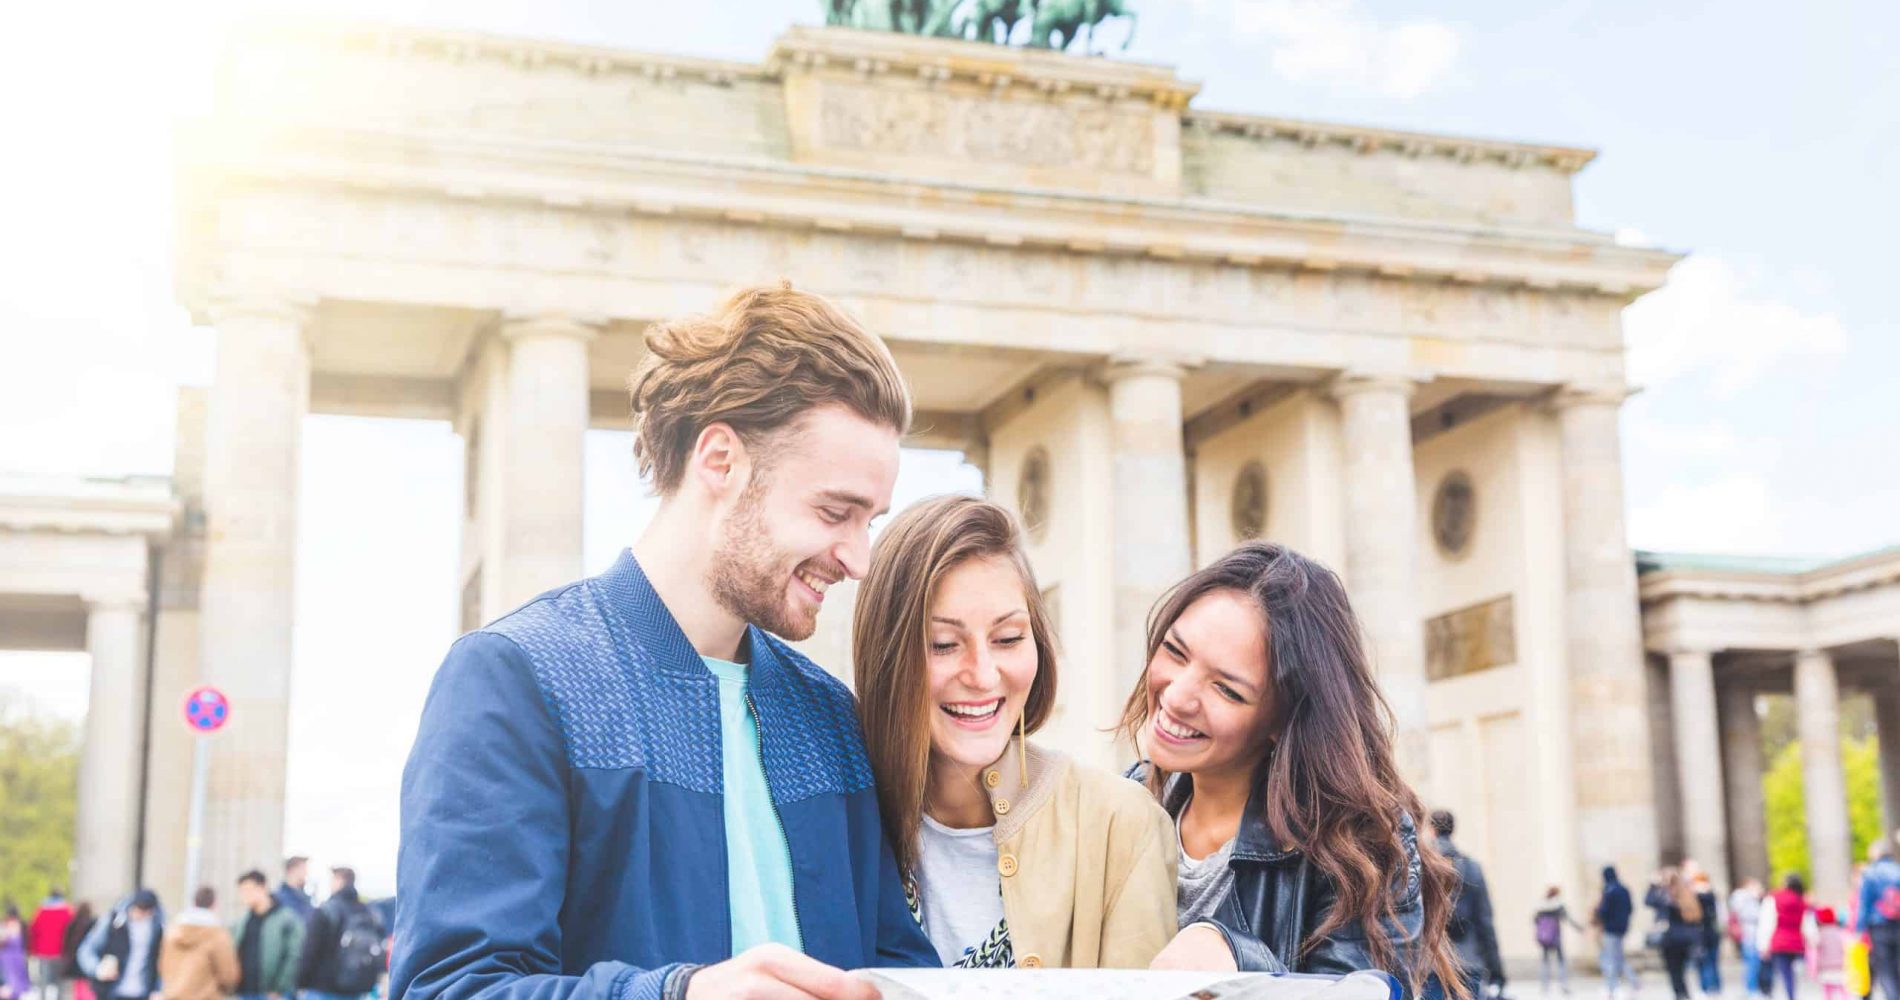 Multiracial group of friends visiting the city of Berlin. Two women and a man looking at a map with Brandenburg Gate on background. Lifestyle, friendship and tourism concepts with real people models.